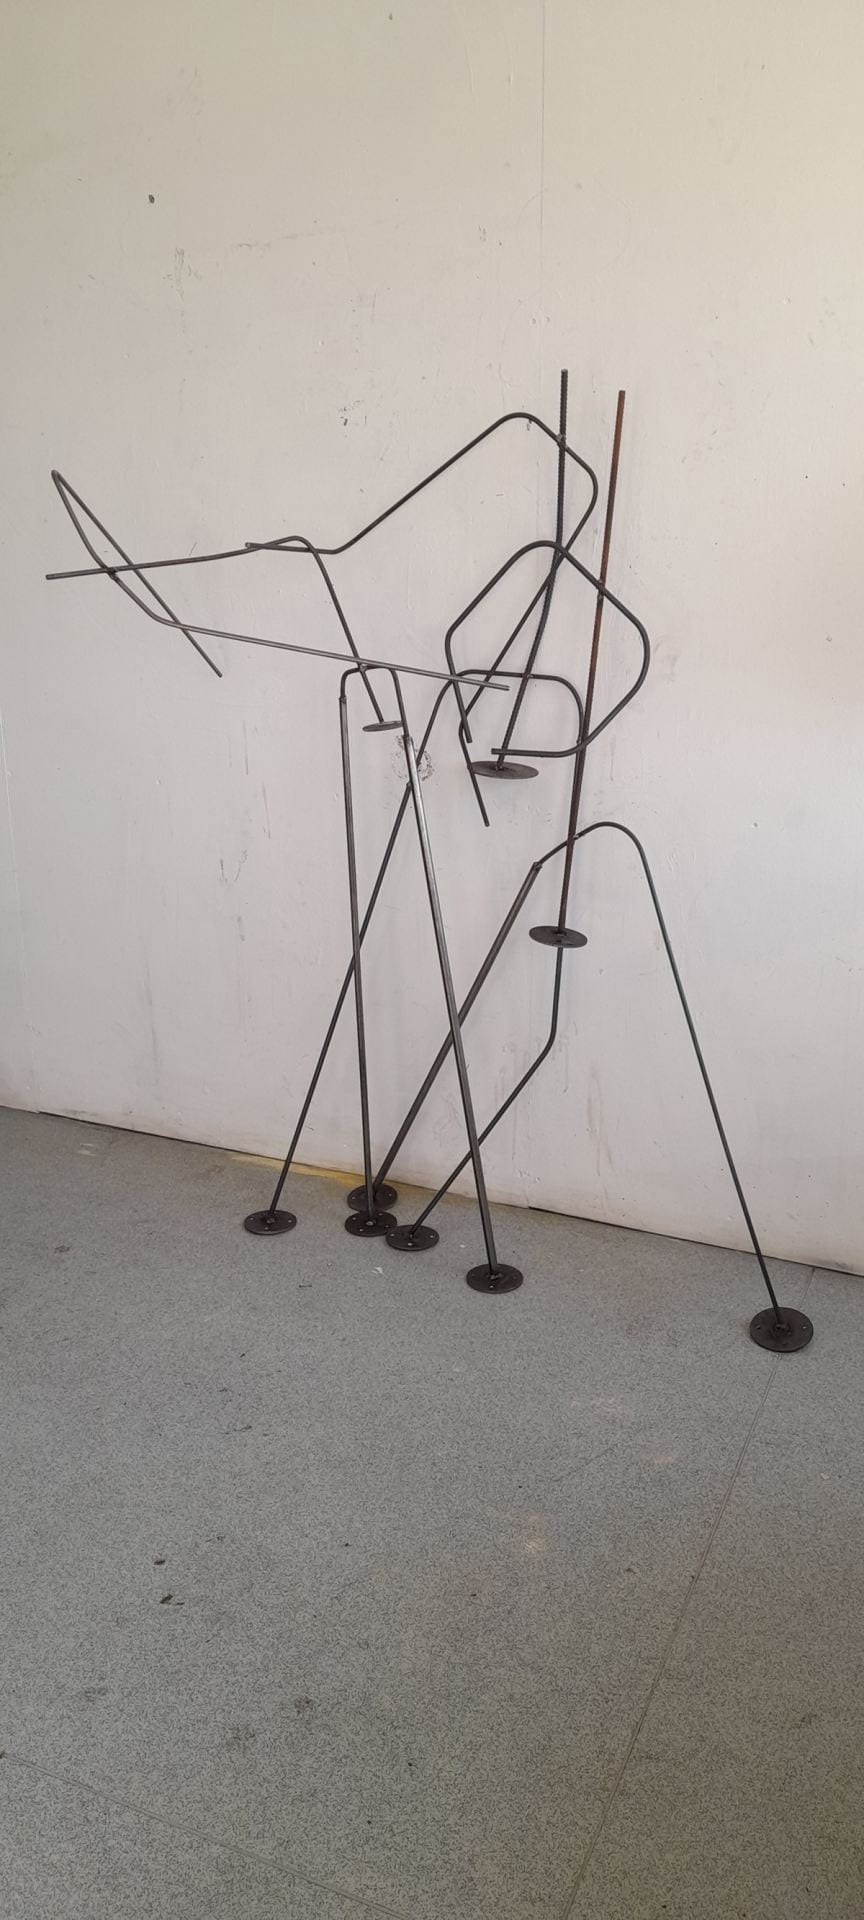 An image of pair of abstract figures made out of metal rebar leaning against a white wall.